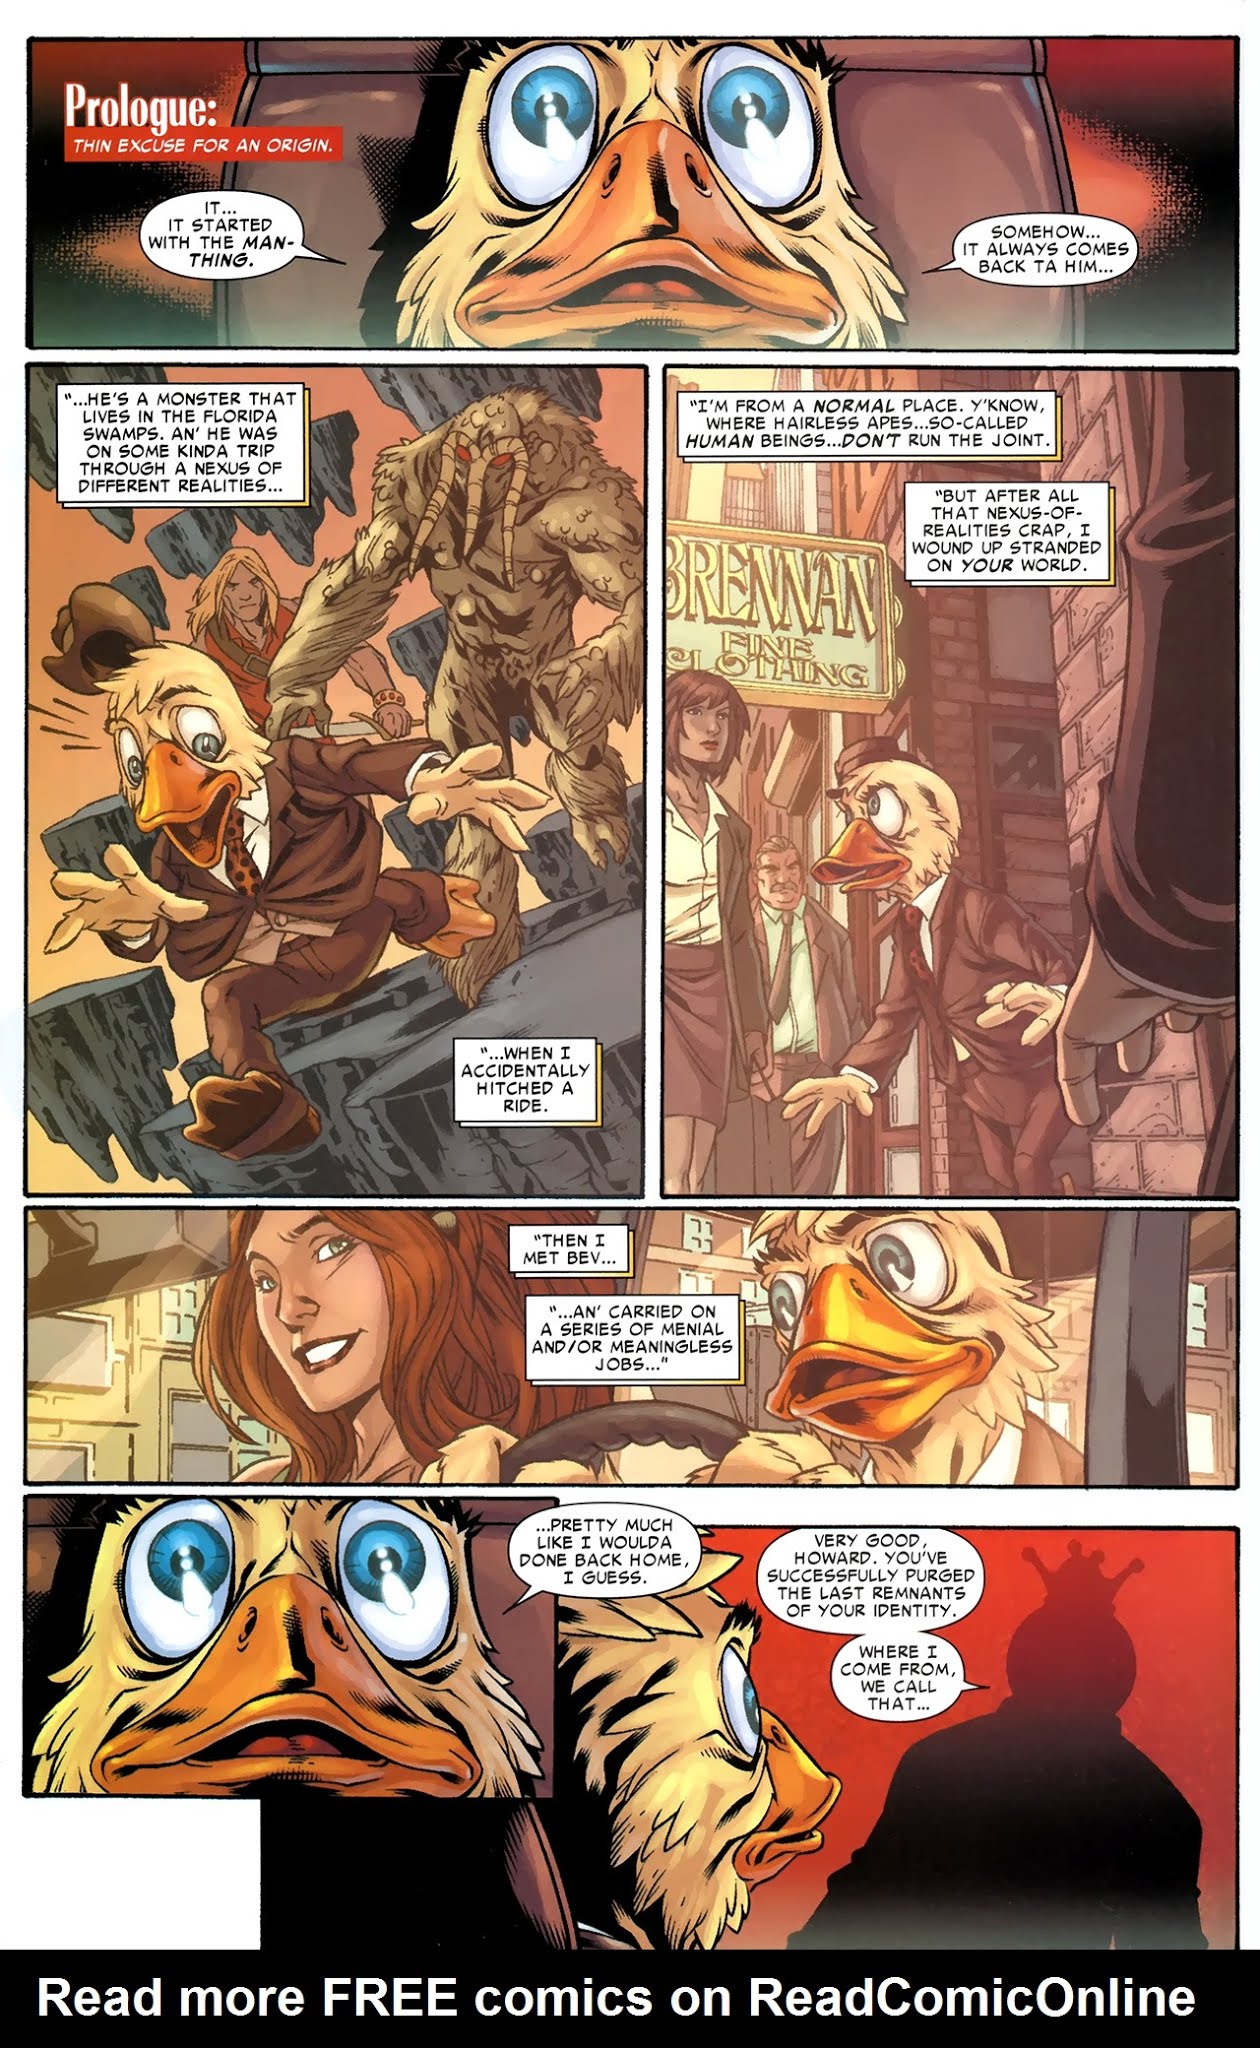 Read online The Amazing Spider-Man: Back in Quack comic -  Issue # Full - 3